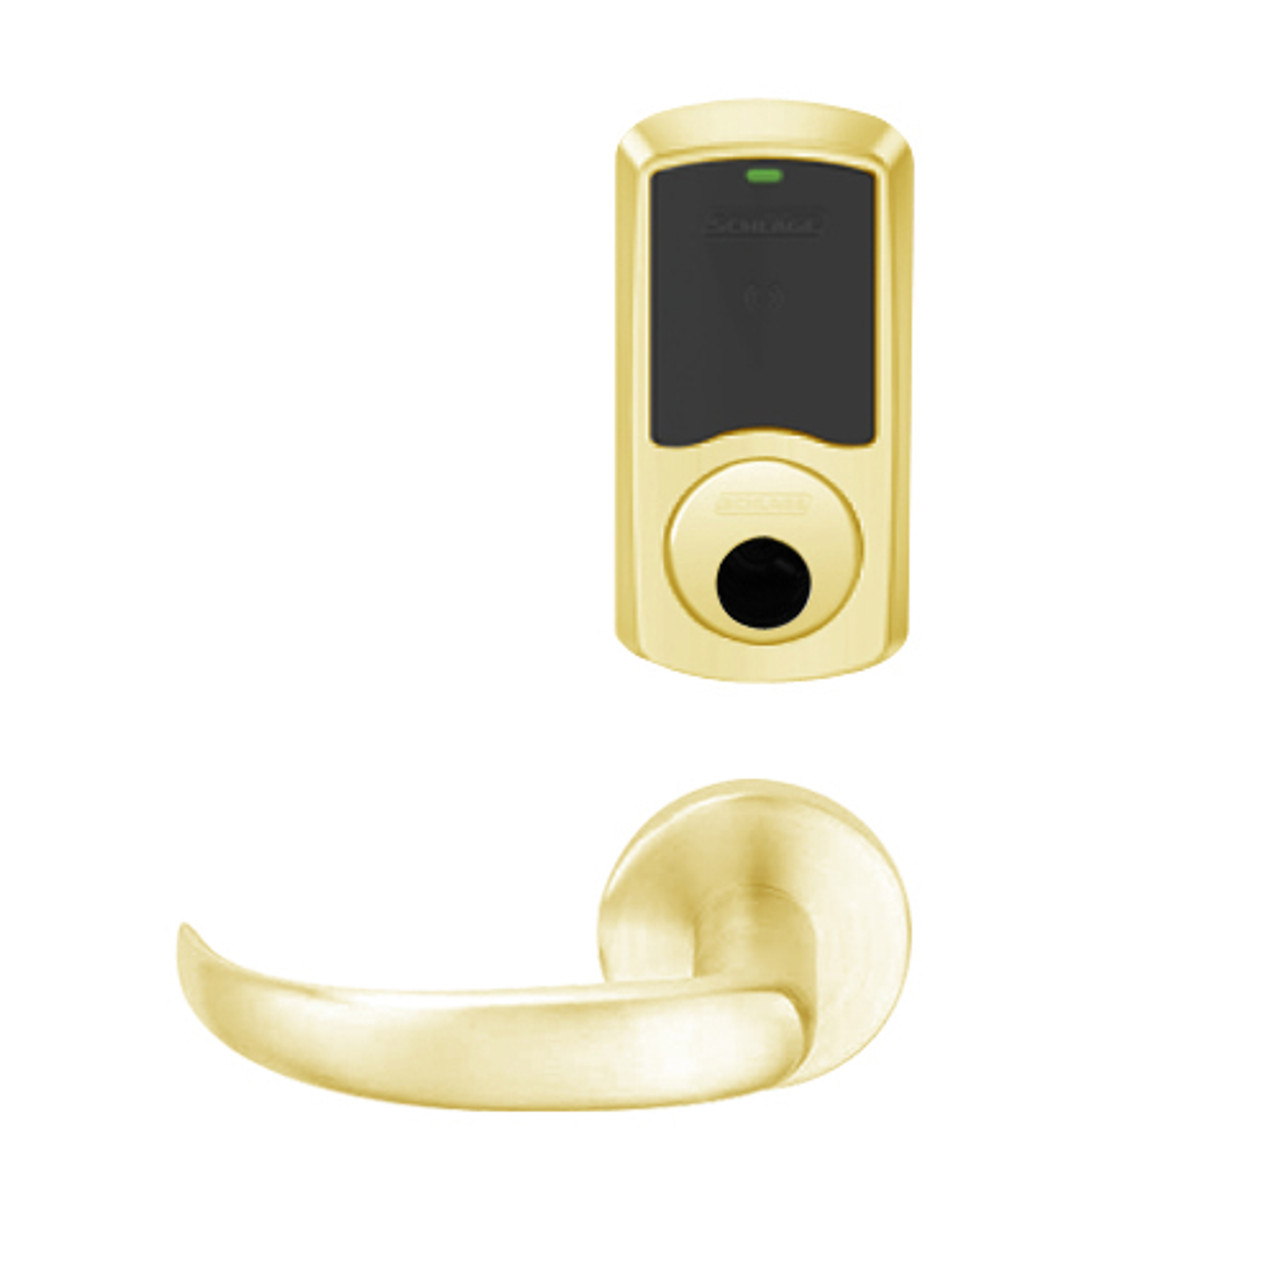 LEMD-GRW-L-17-605-00A Schlage Less Cylinder Privacy/Apartment Wireless Greenwich Mortise Deadbolt Lock with LED and Sparta Lever in Bright Brass